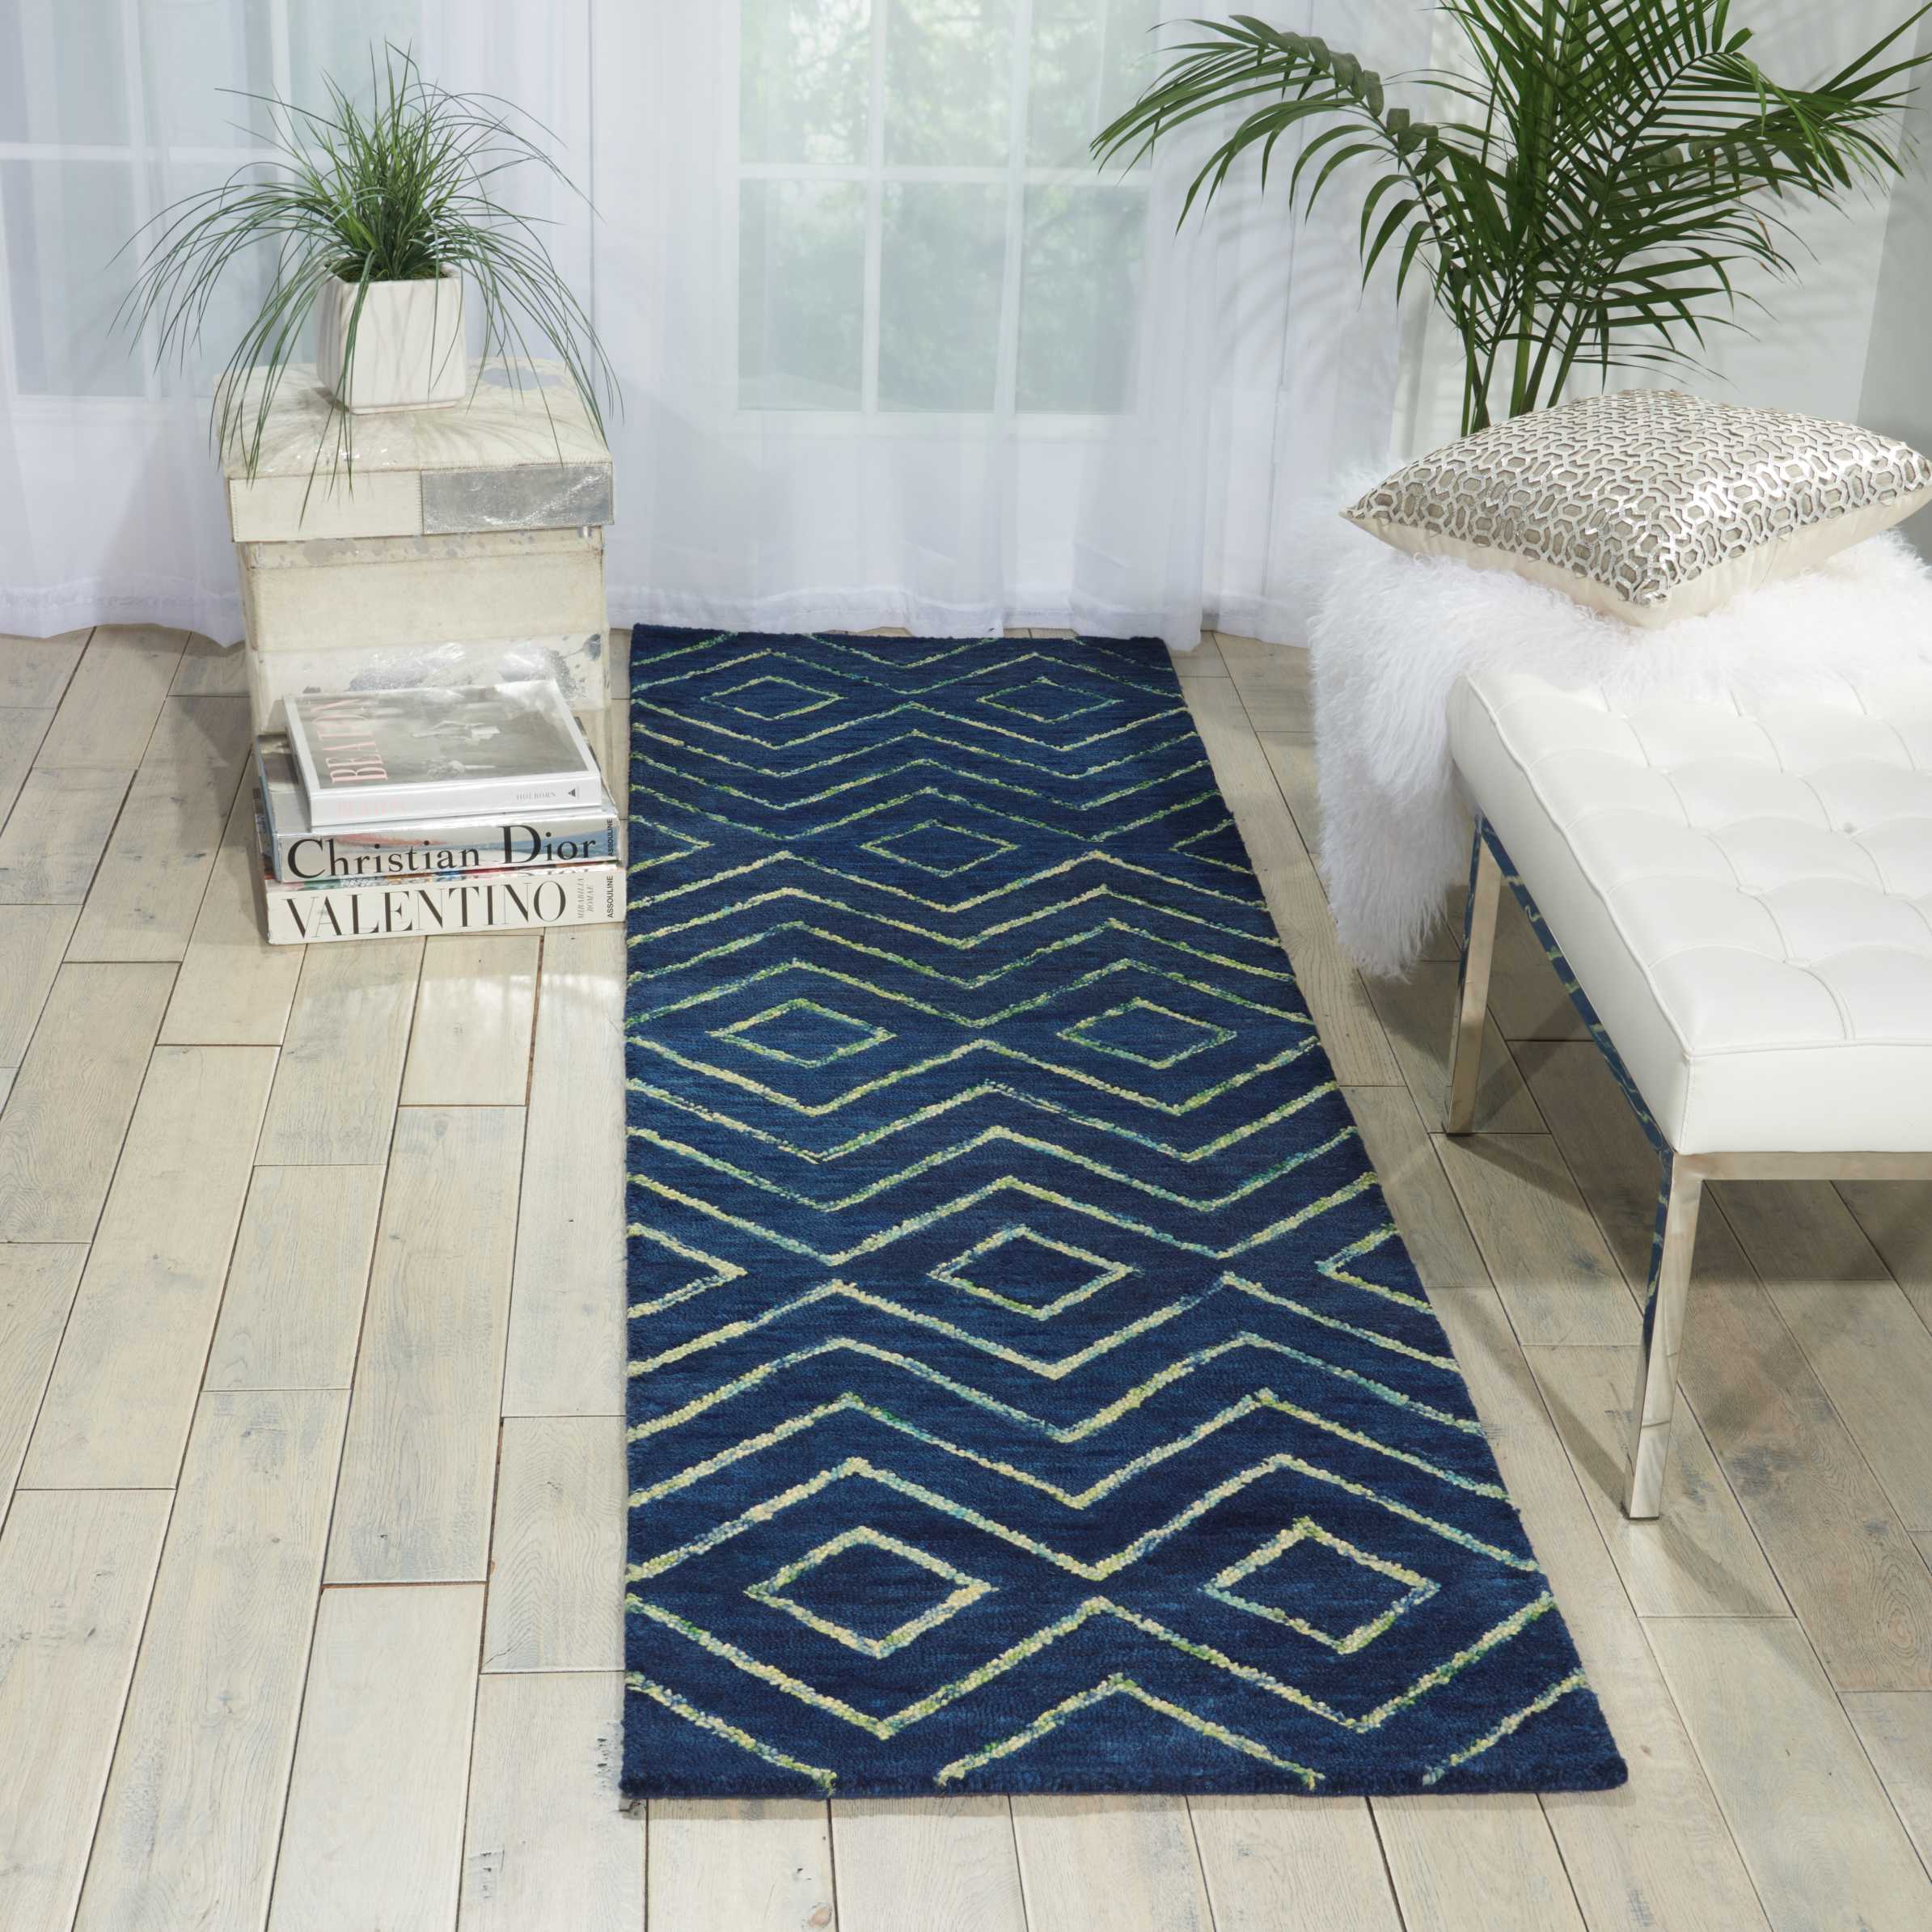 Barclay Butera Intermix Storm Area Rug by Nourison